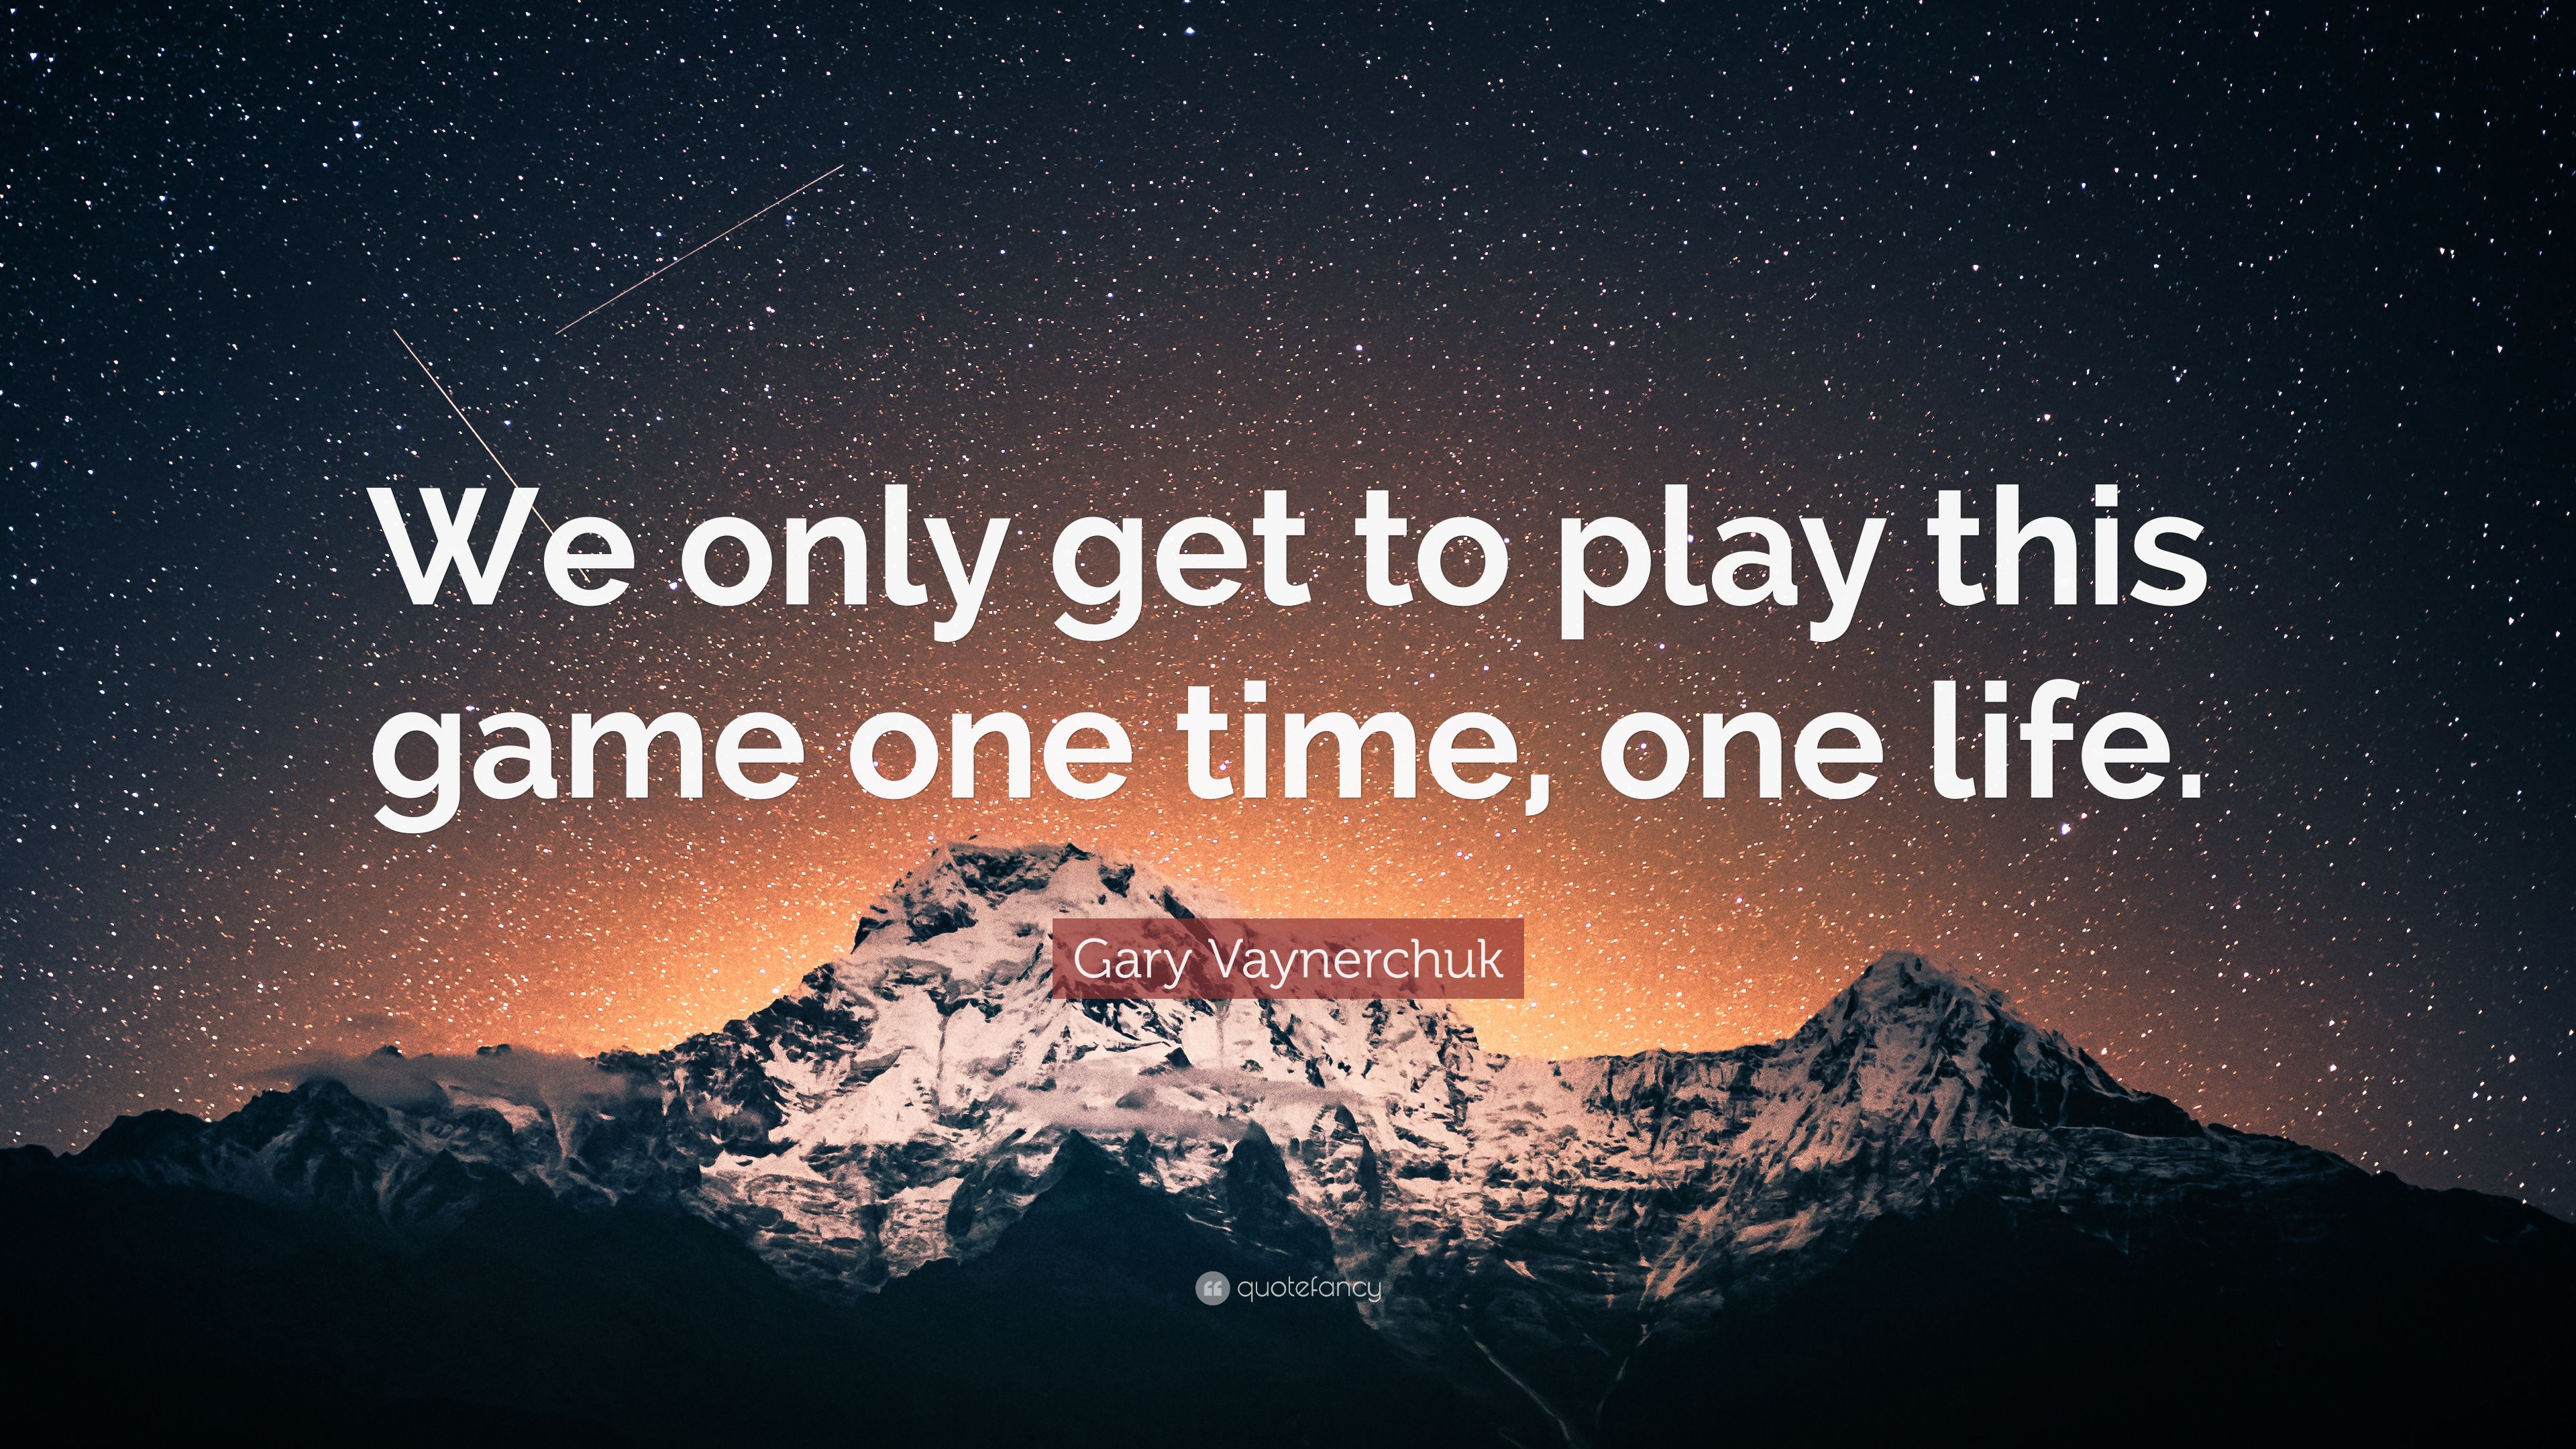 Gary Vaynerchuk Quote: "We only get to play this game one time, one li...